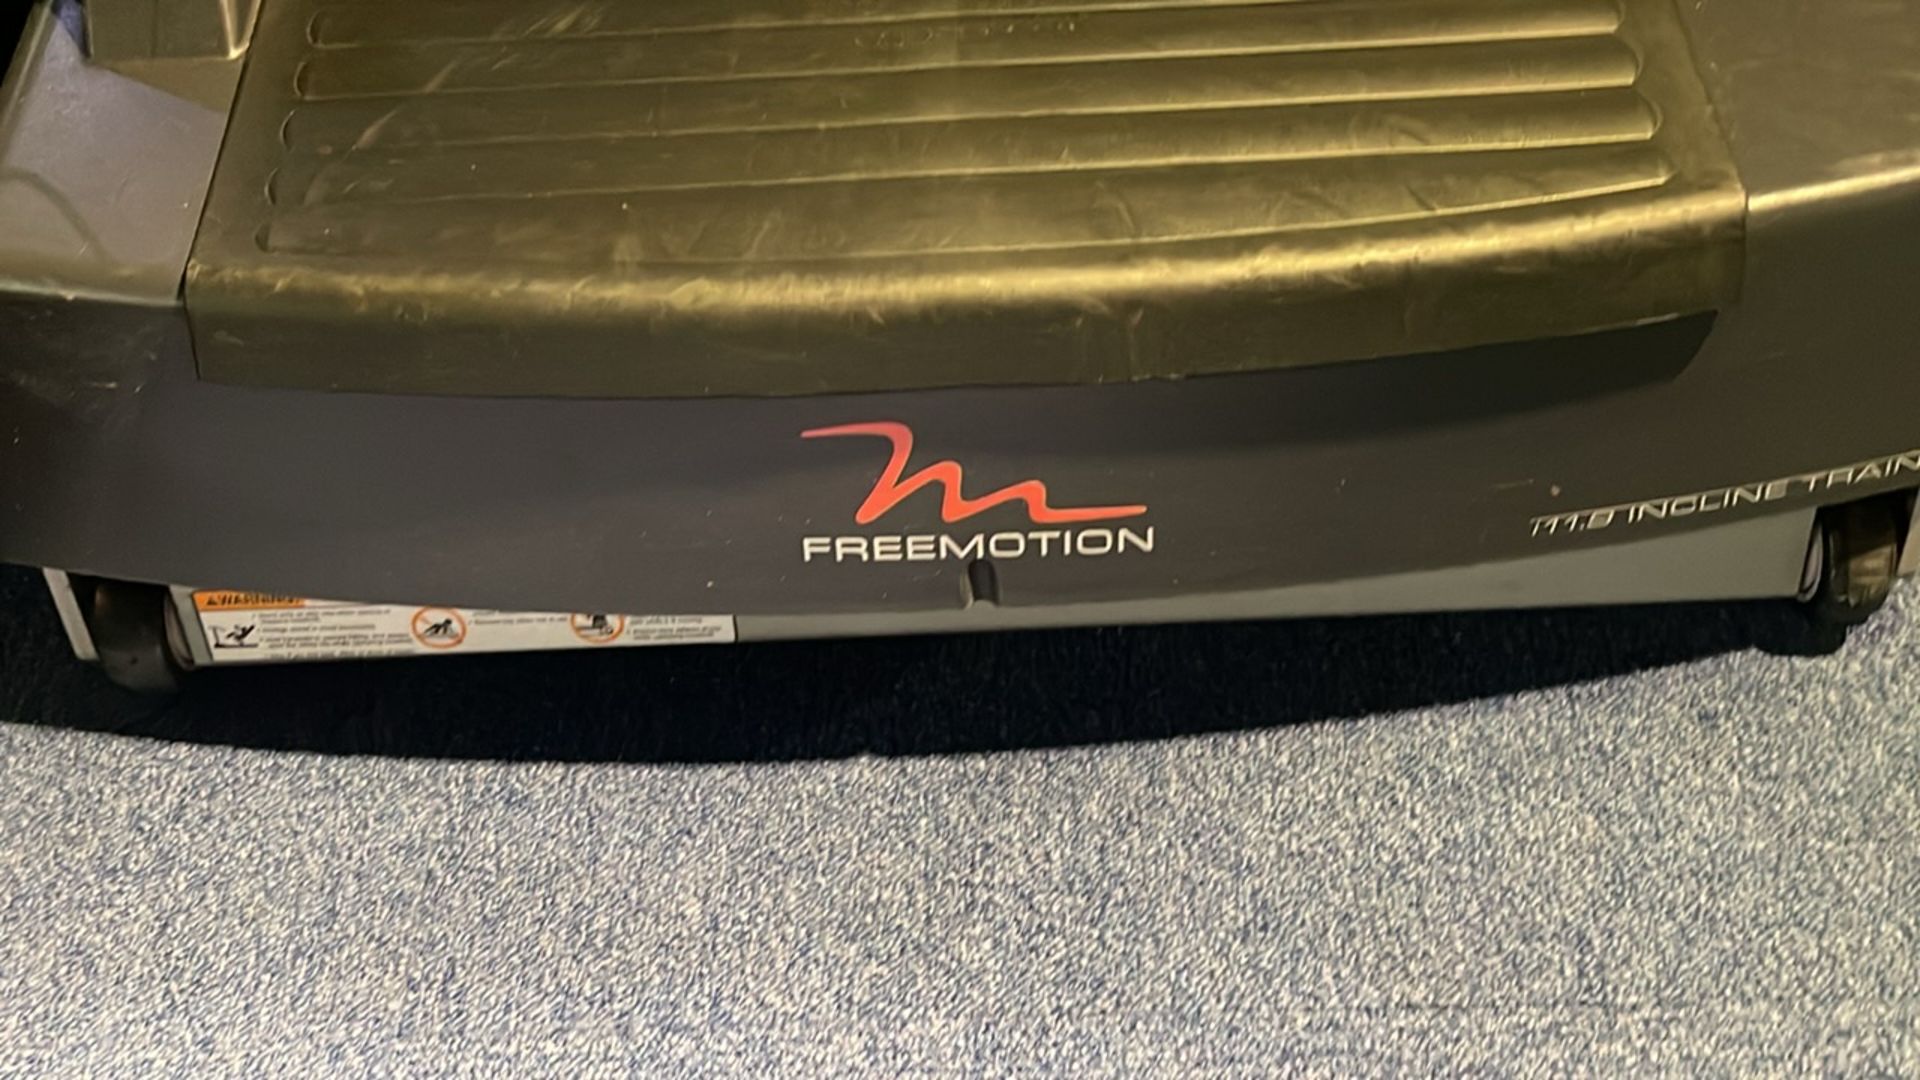 FreeMotion Incline Treadmill - Image 3 of 11